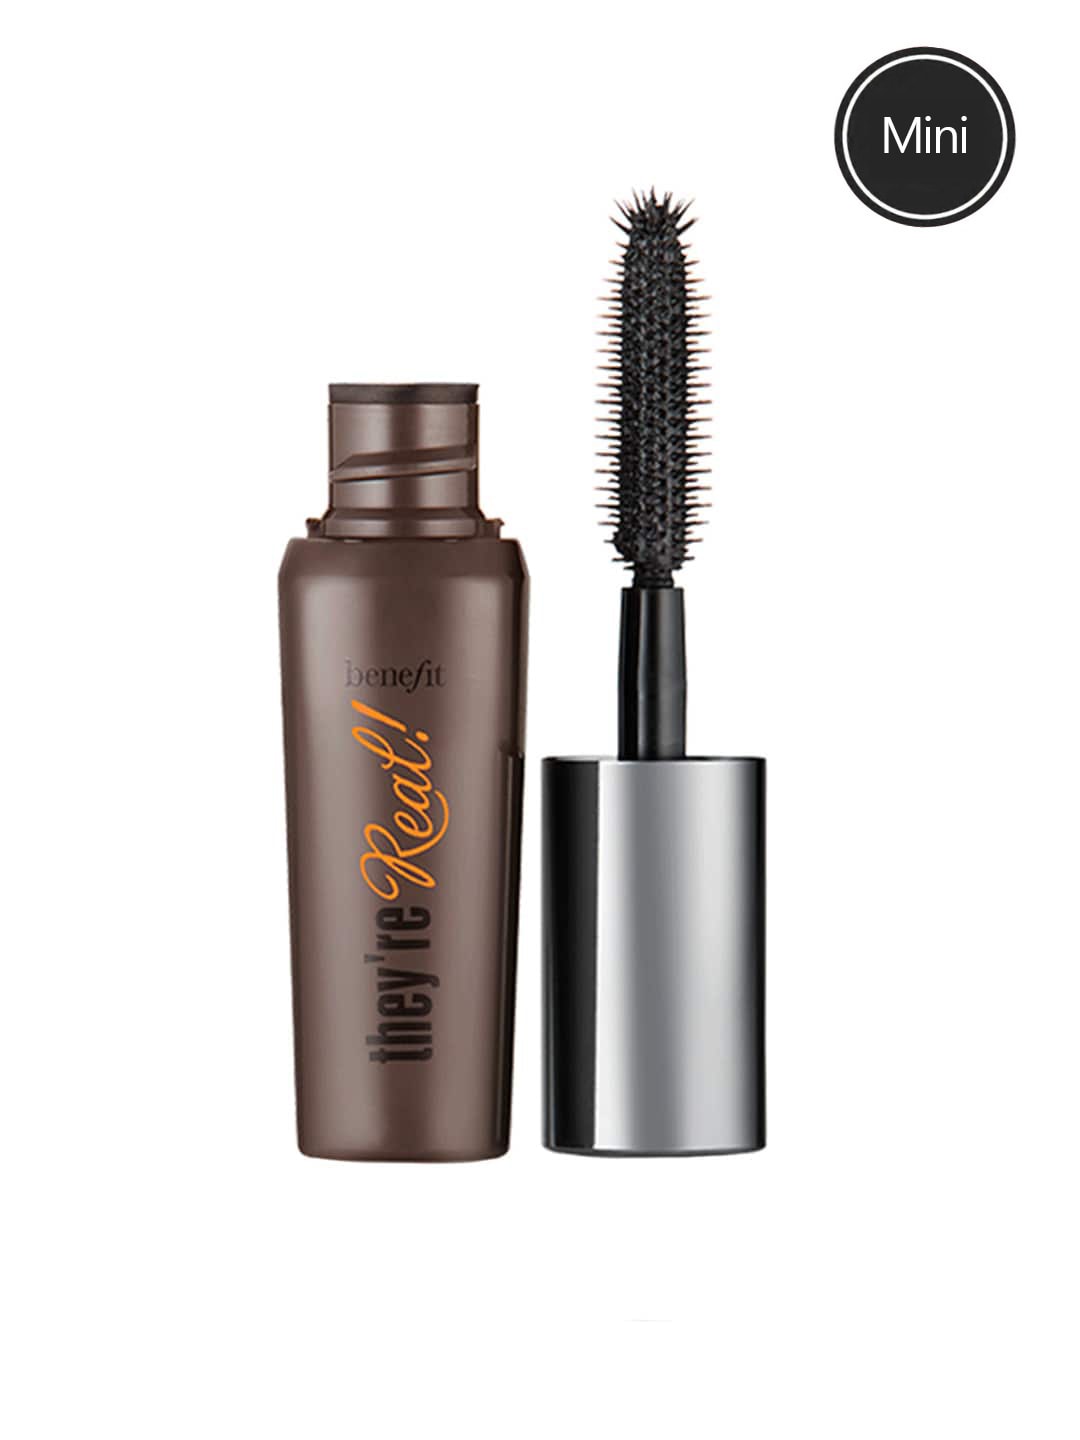 Benefit Cosmetics They're Real! Mini EM Mascara - Jet Black Price in India